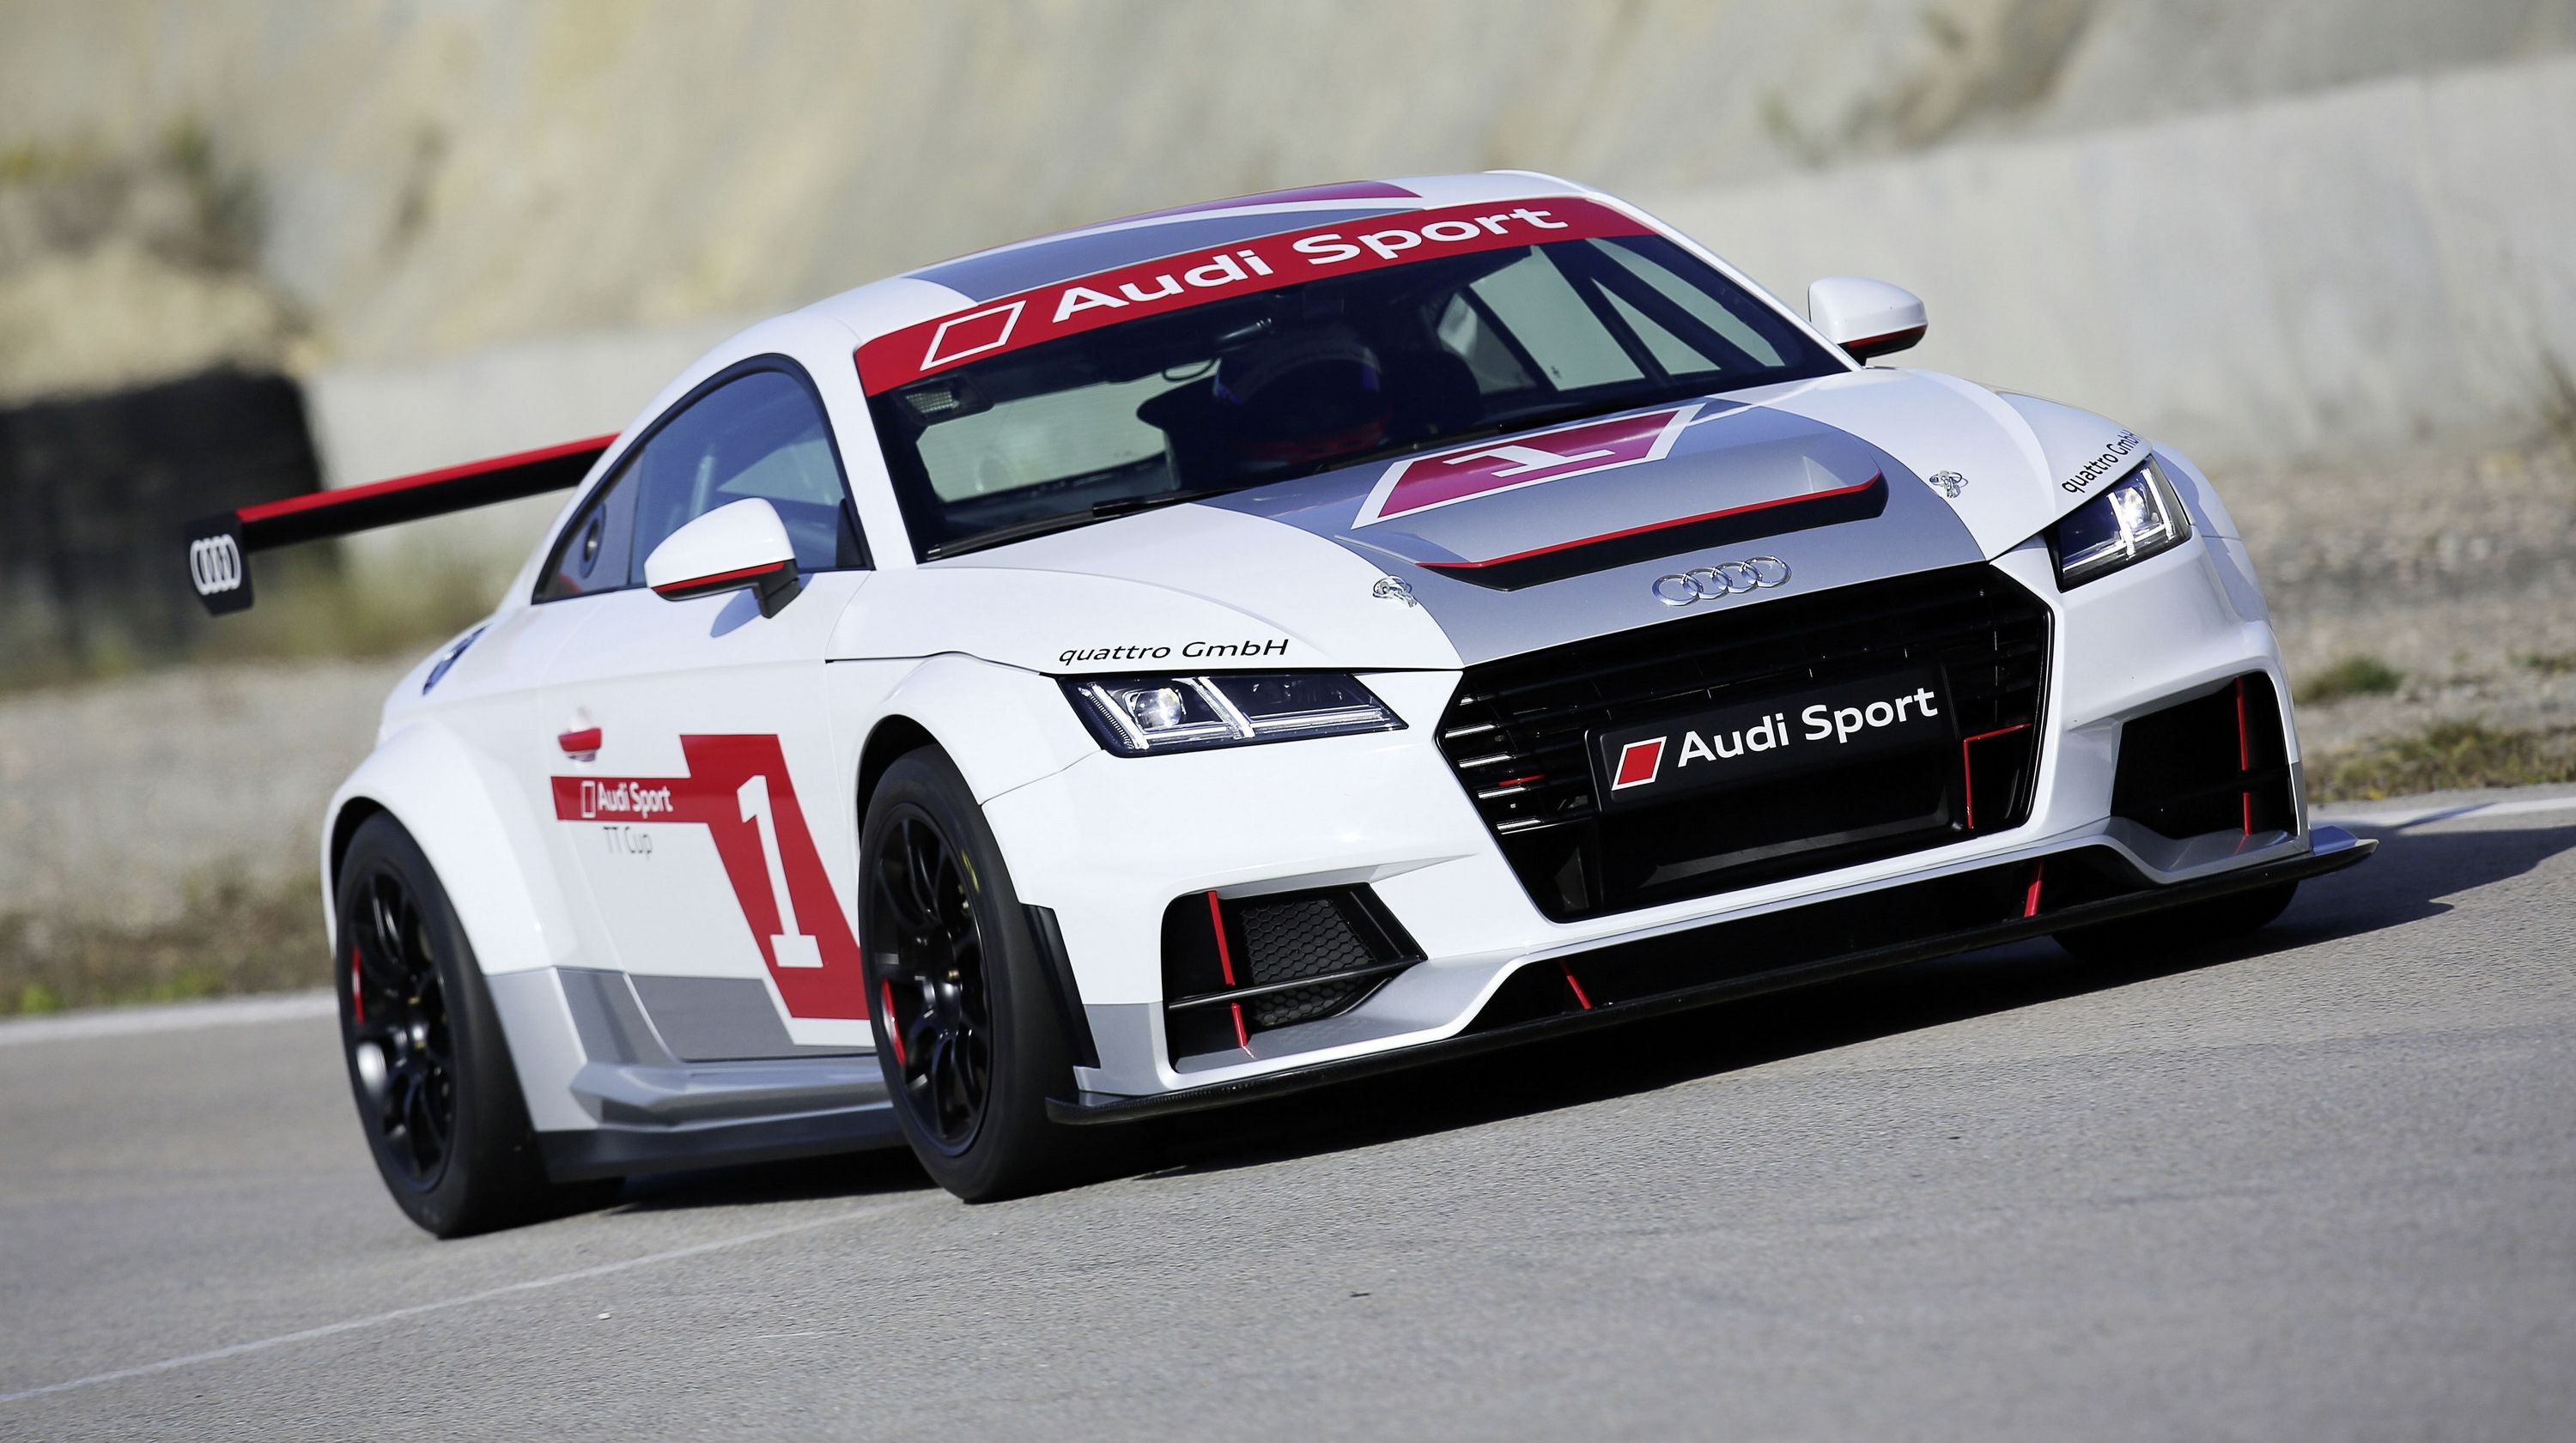  The TT Coupe is heading into one-make racing with the new Audi Sport TT Cup race car. 